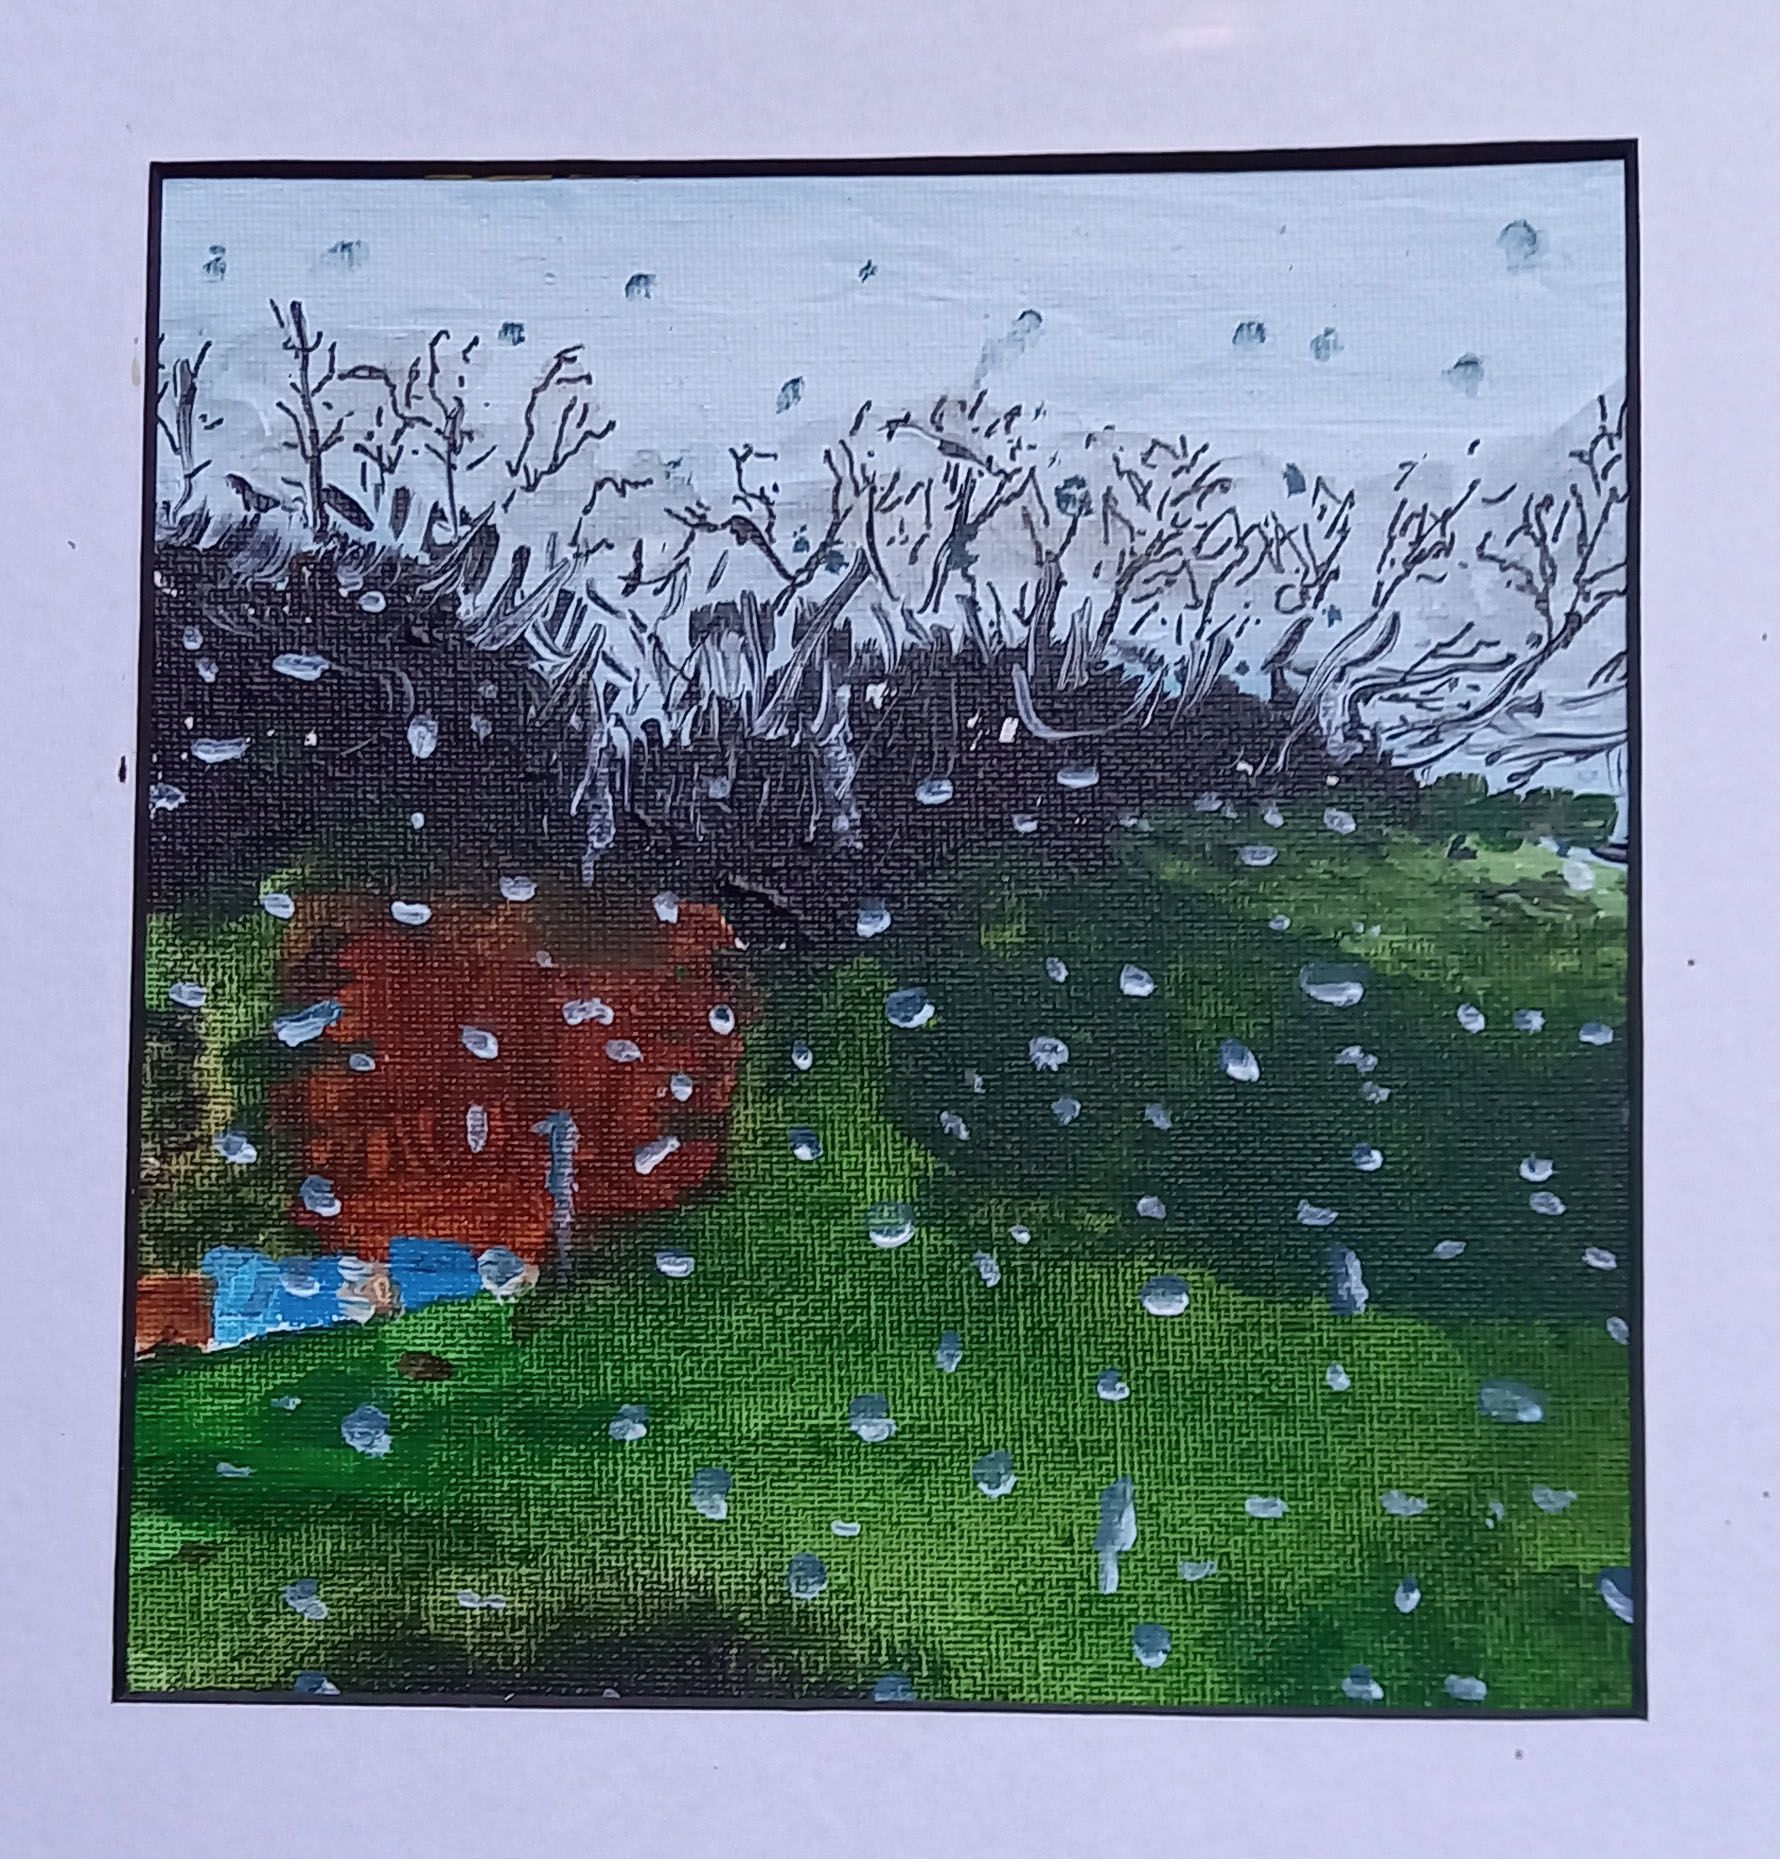 Wet Day in the Shed   ________________________________ acrylic on canvas board  (20cm x 20cm x 0.4cm)           NFS